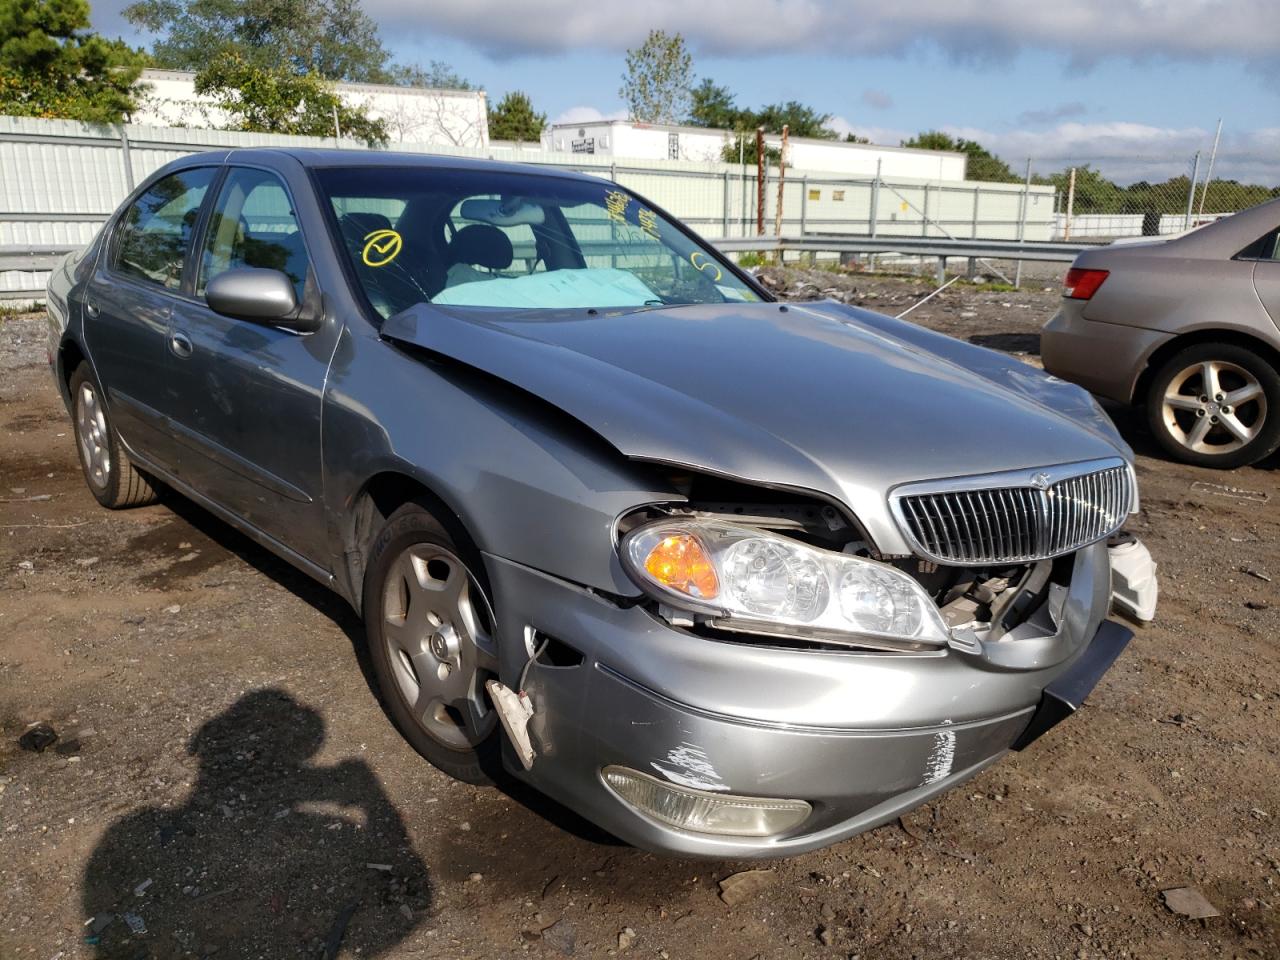 2000 Infiniti I30 for sale at Copart Brookhaven, NY Lot #56466*** |  SalvageReseller.com